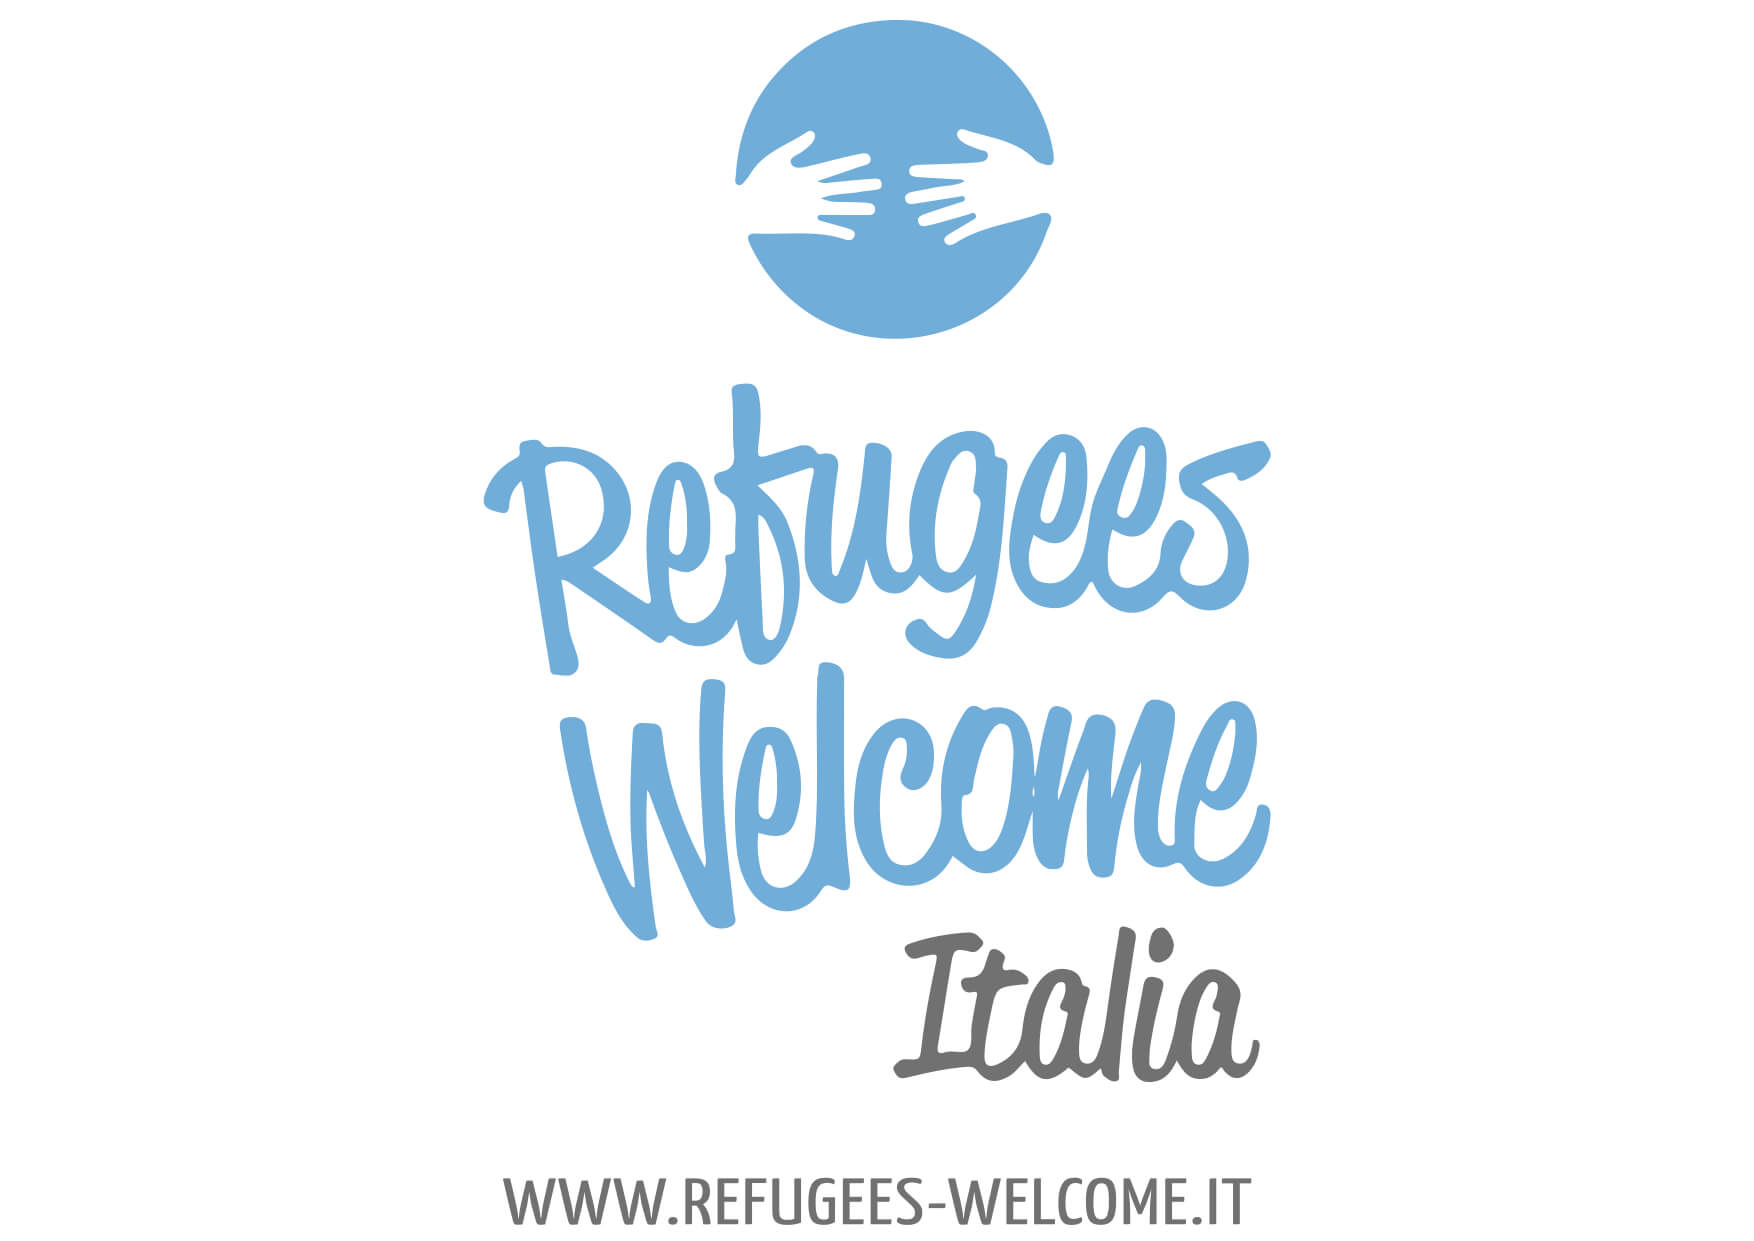 Refugees welcome